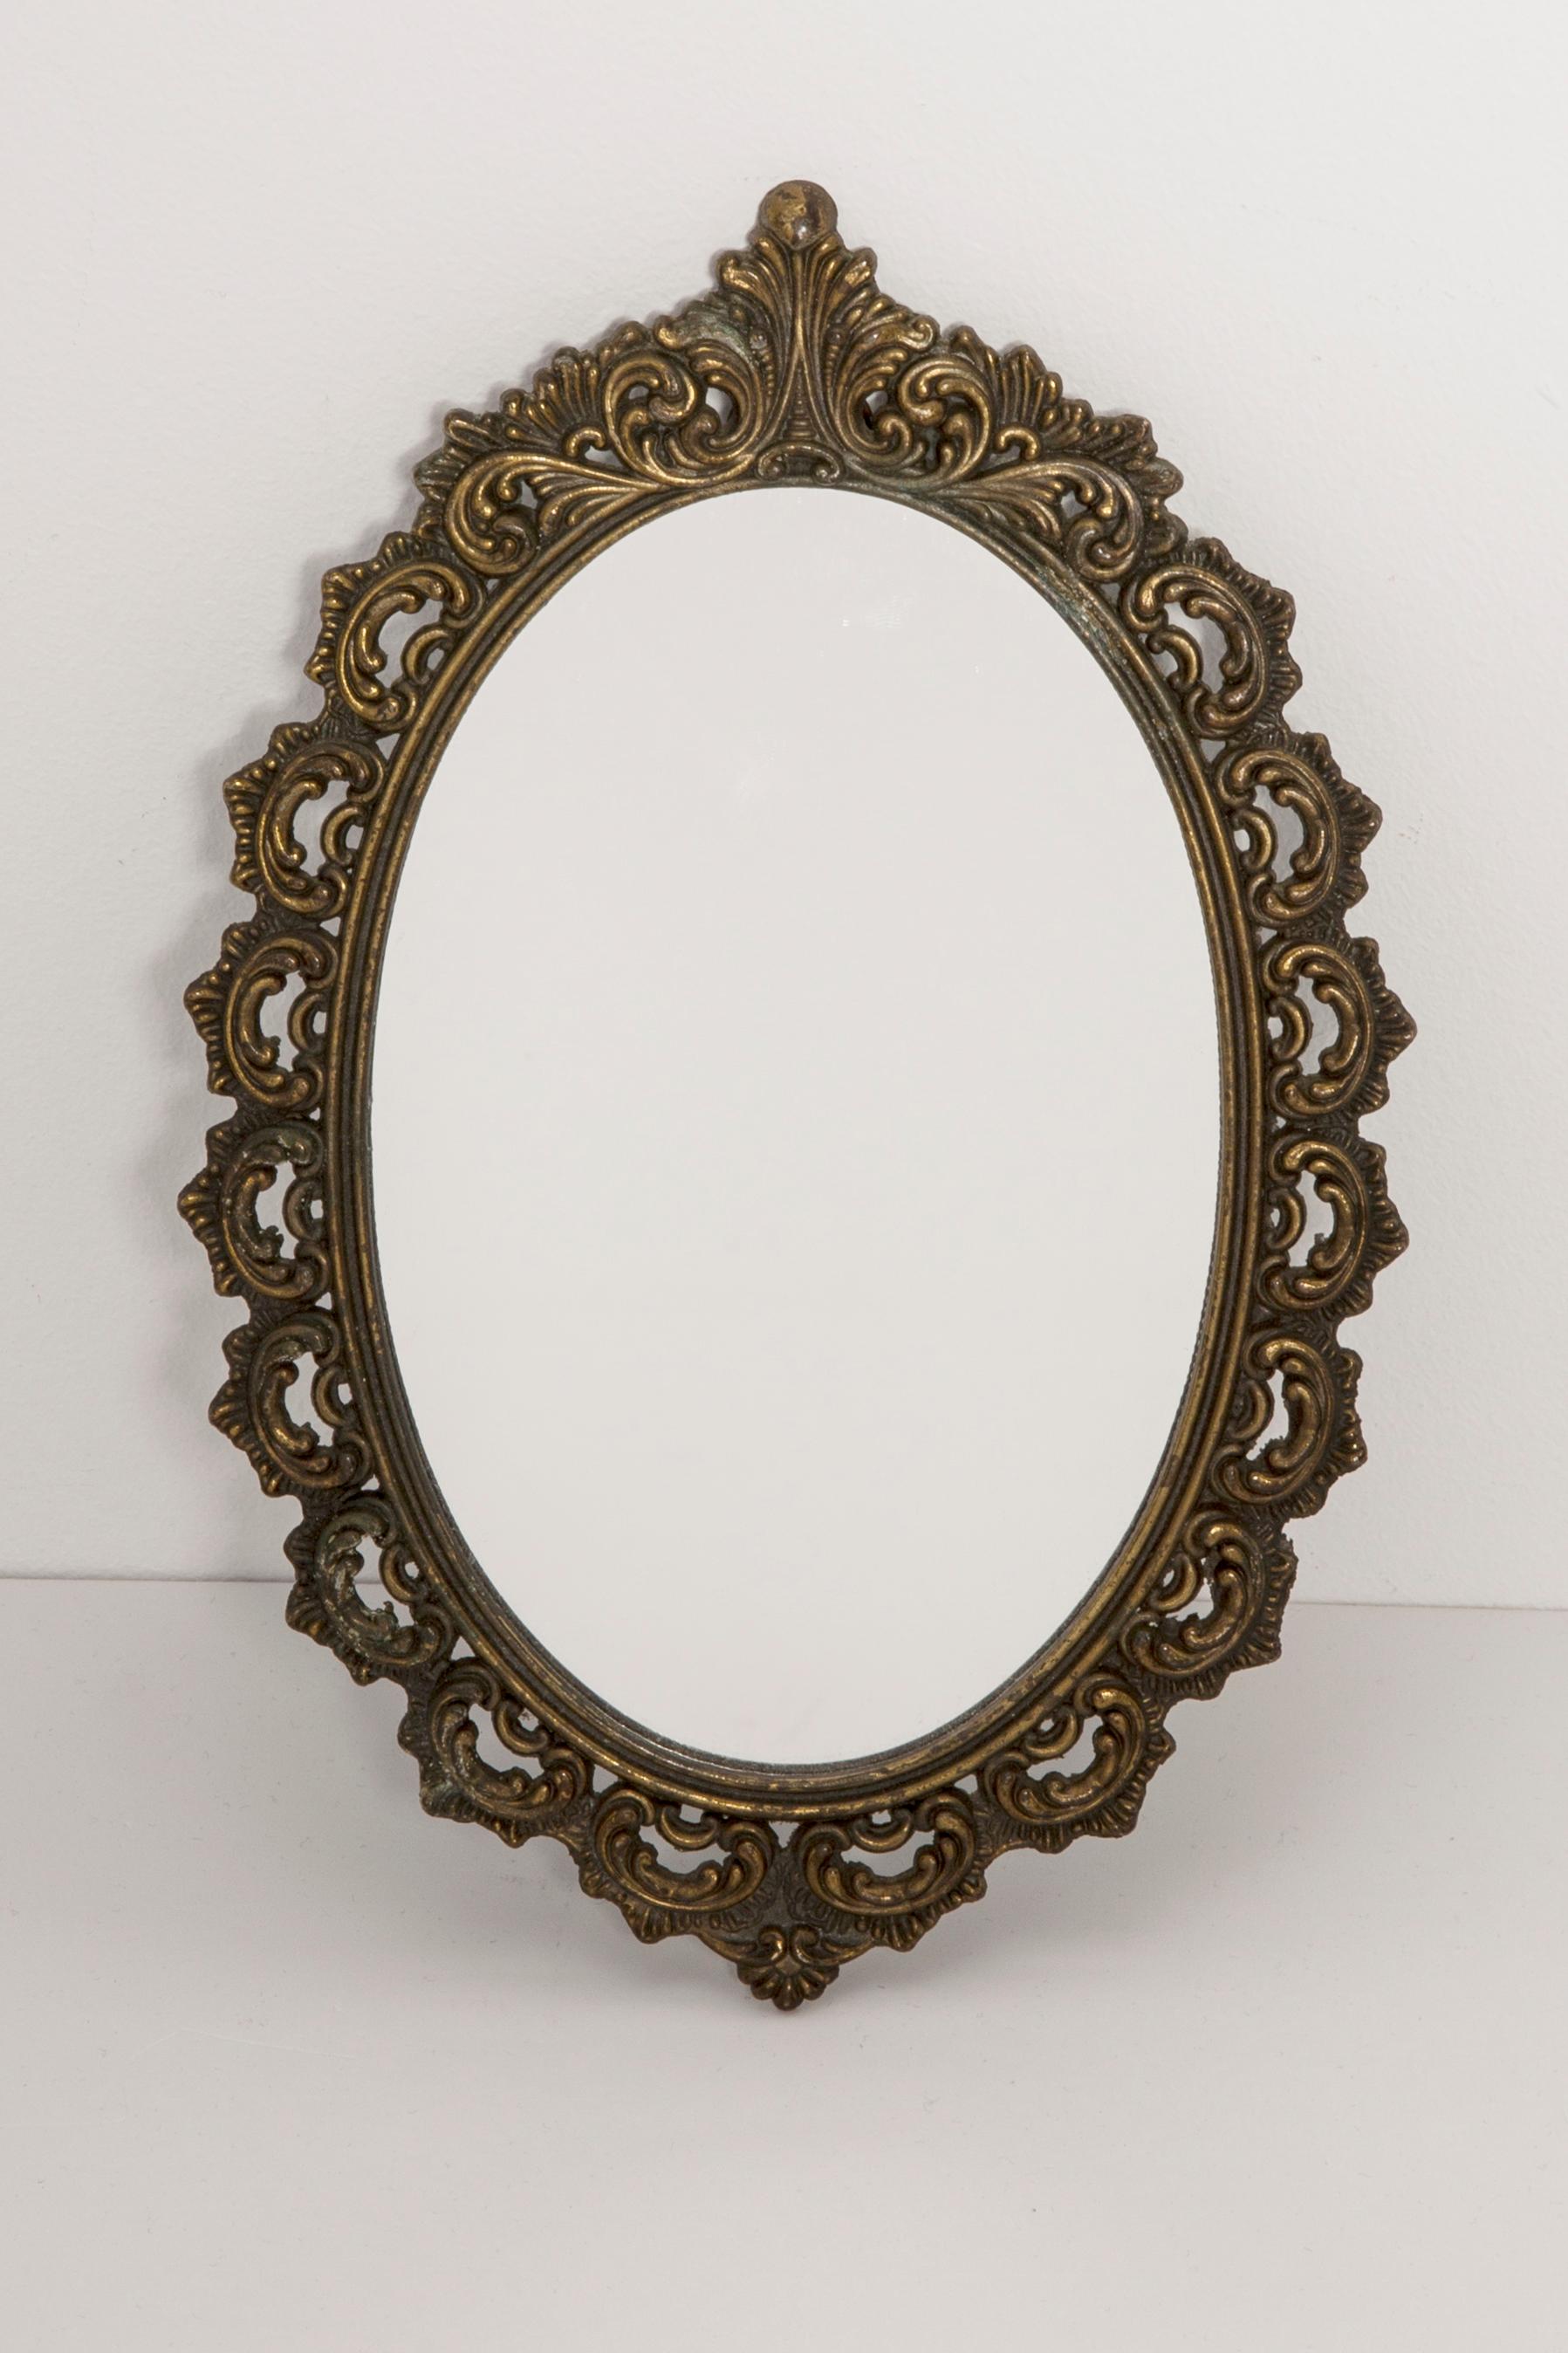 A beautiful mini oval mirror in a dark golden decorative frame from Italy. The frame is made of metal. Mirror is in very good vintage condition, no damage or cracks in the frame. Original glass. Beautiful piece for every interior! Signed 